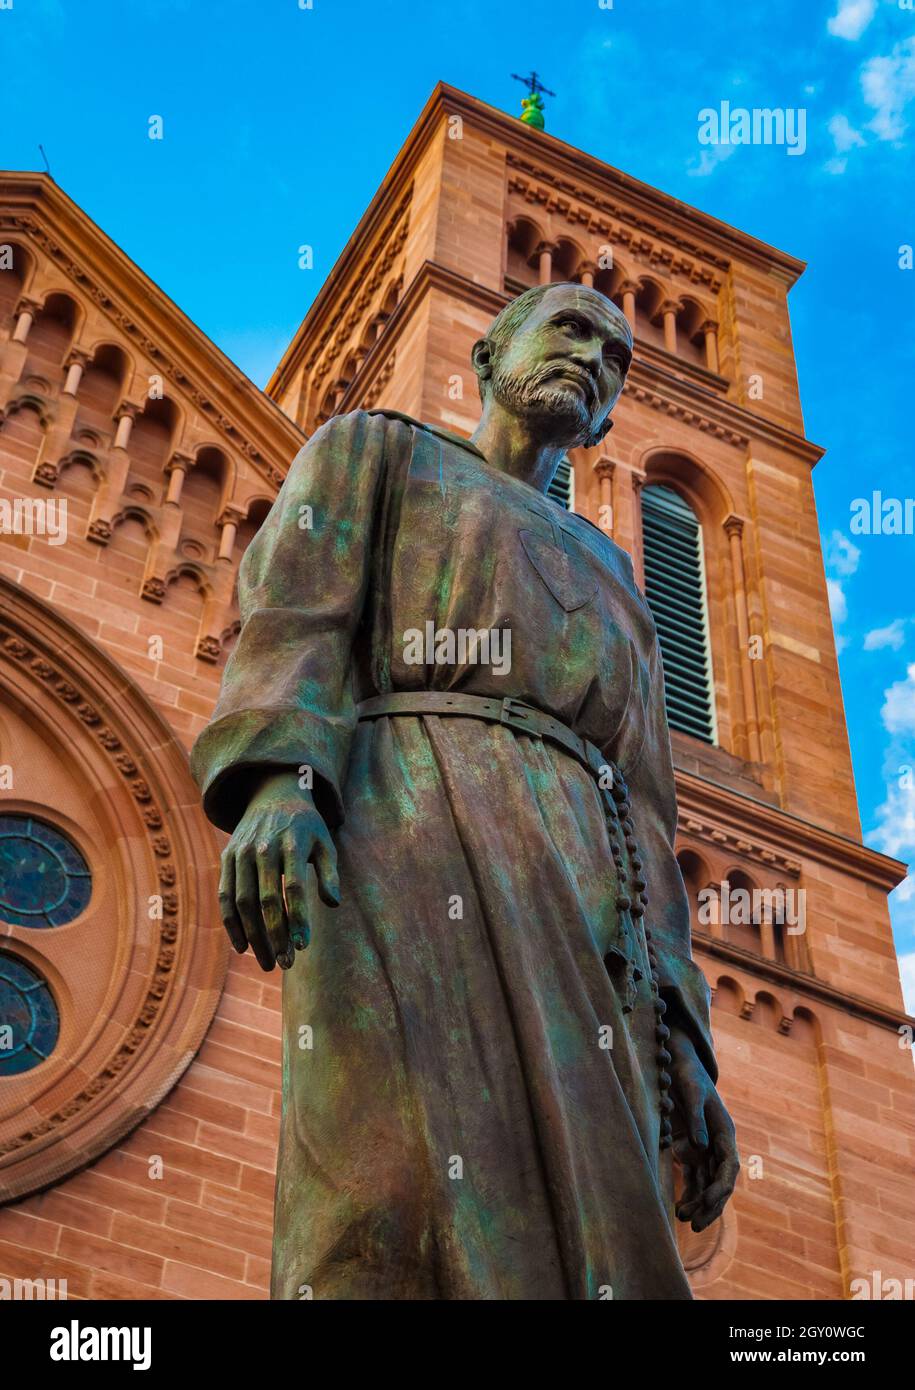 Lovely low angle close-up of the memorial statue of Charles de Foucauld in front of the Saint-Pierre-le-Jeune Catholic Church in Strasbourg. He was... Stock Photo